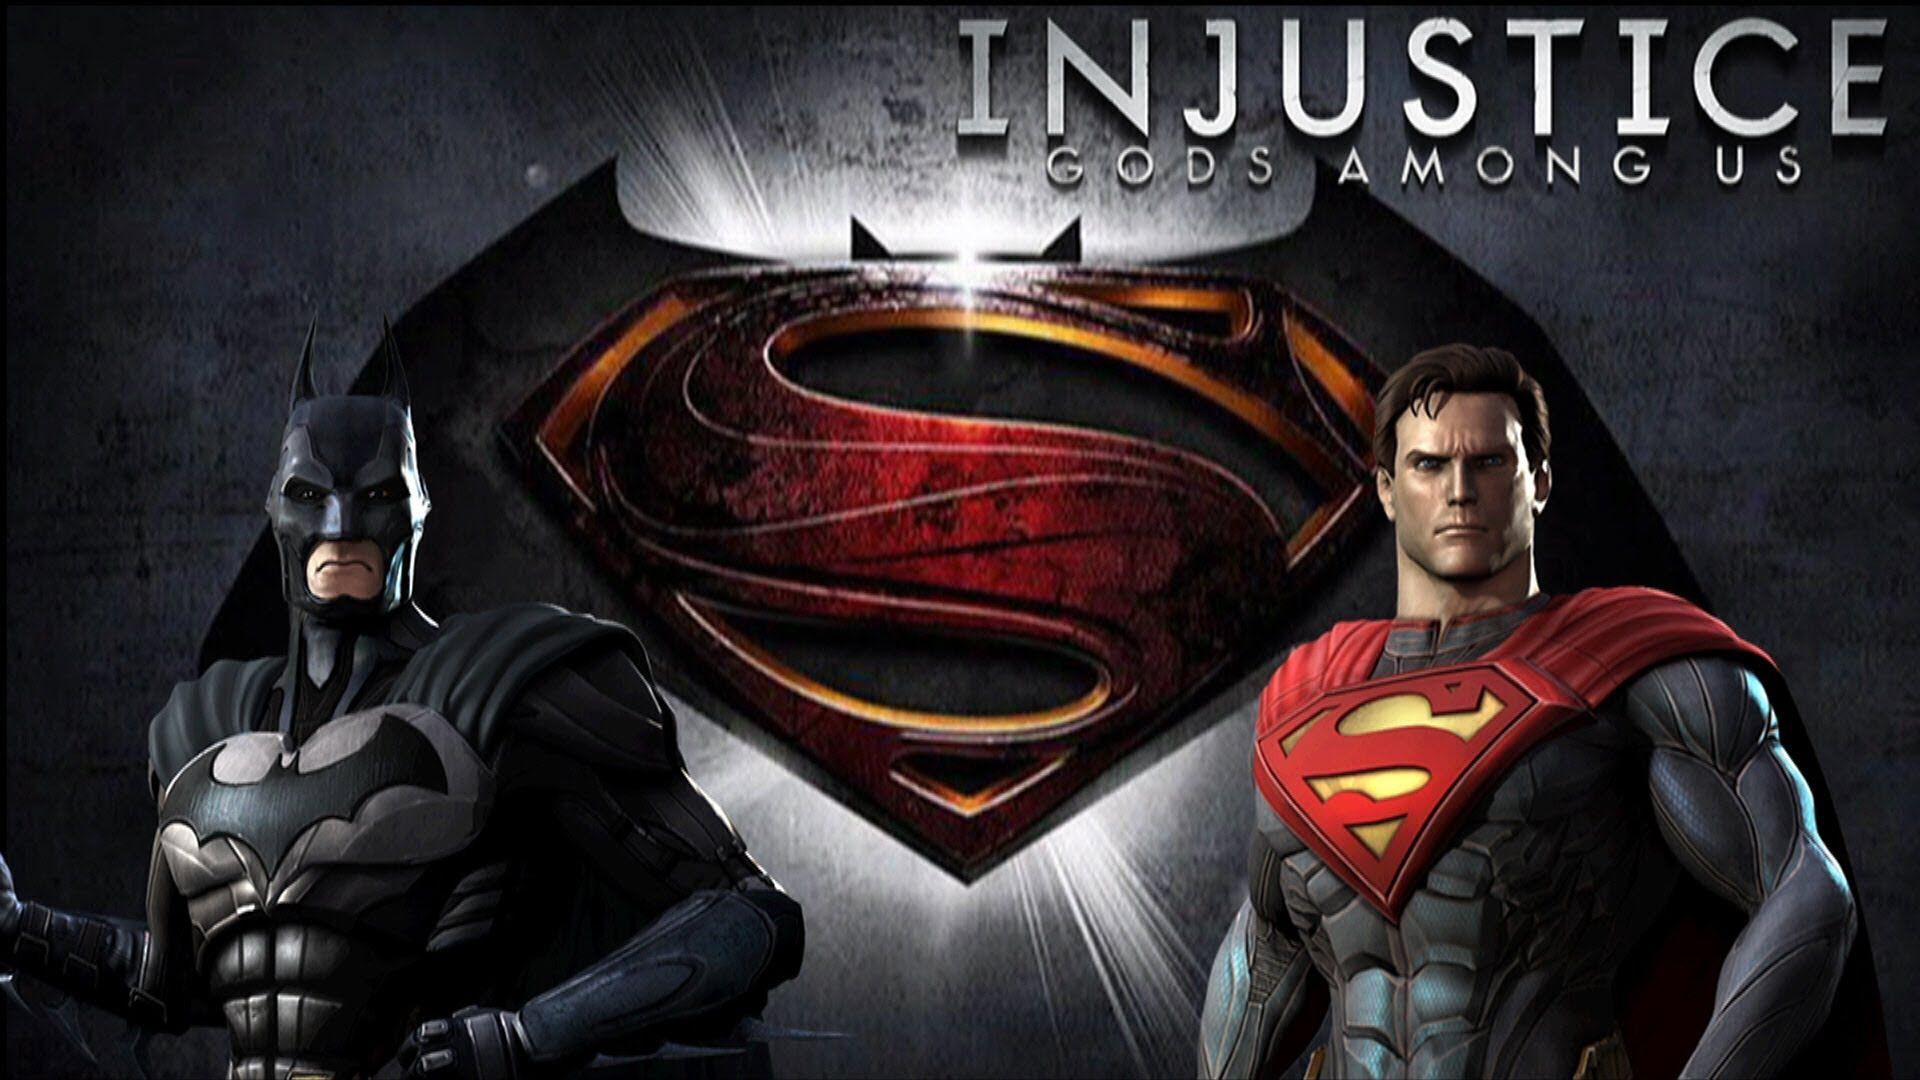 Injustice Gods Among Us Vs Superman with Lore & Skins